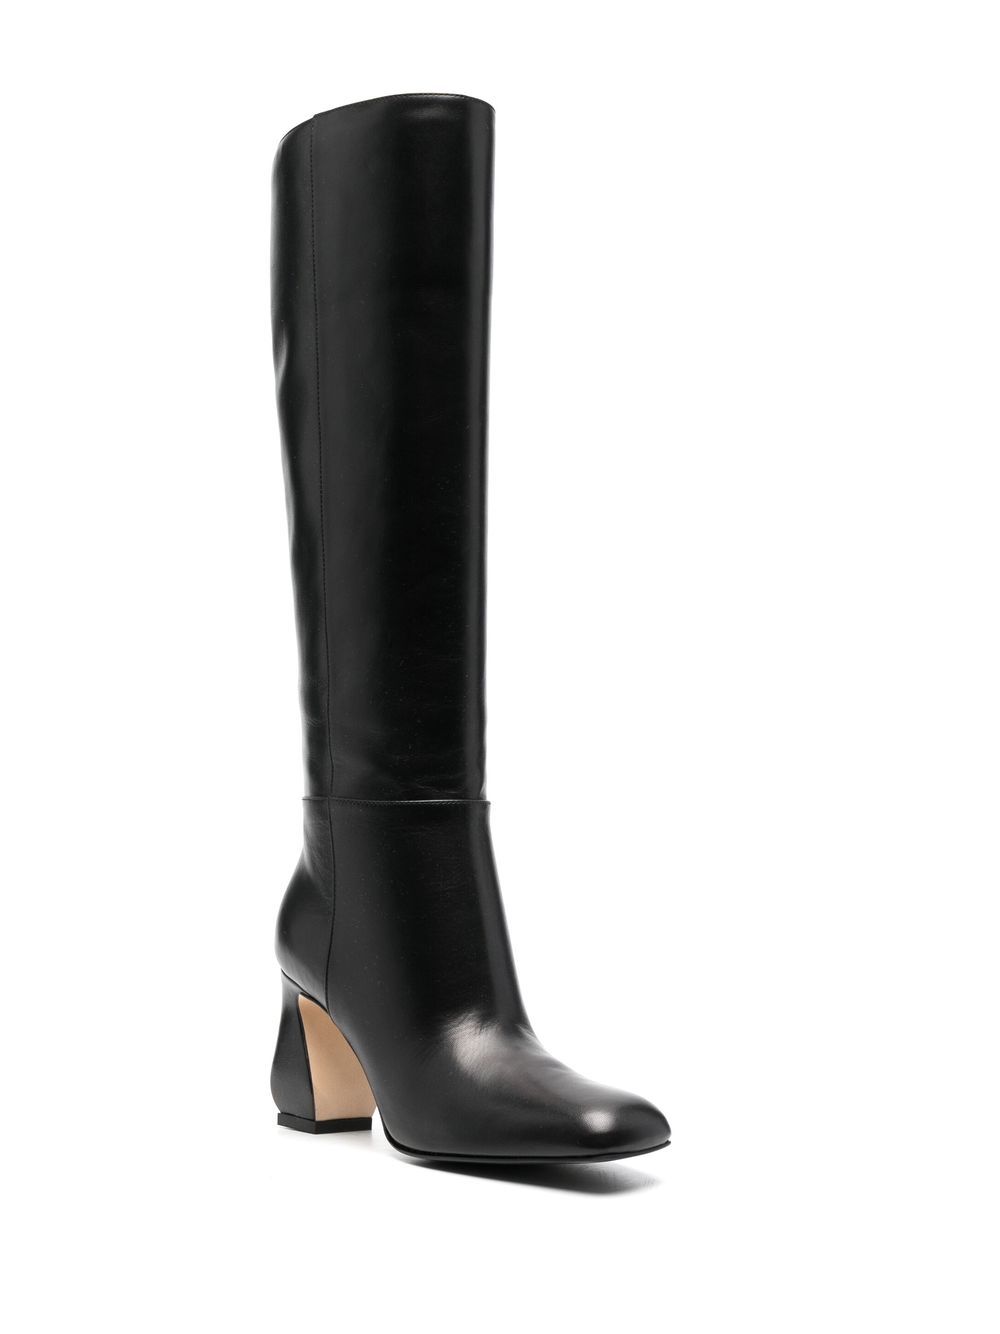 KNEE-HIGH LEATHER BOOTS